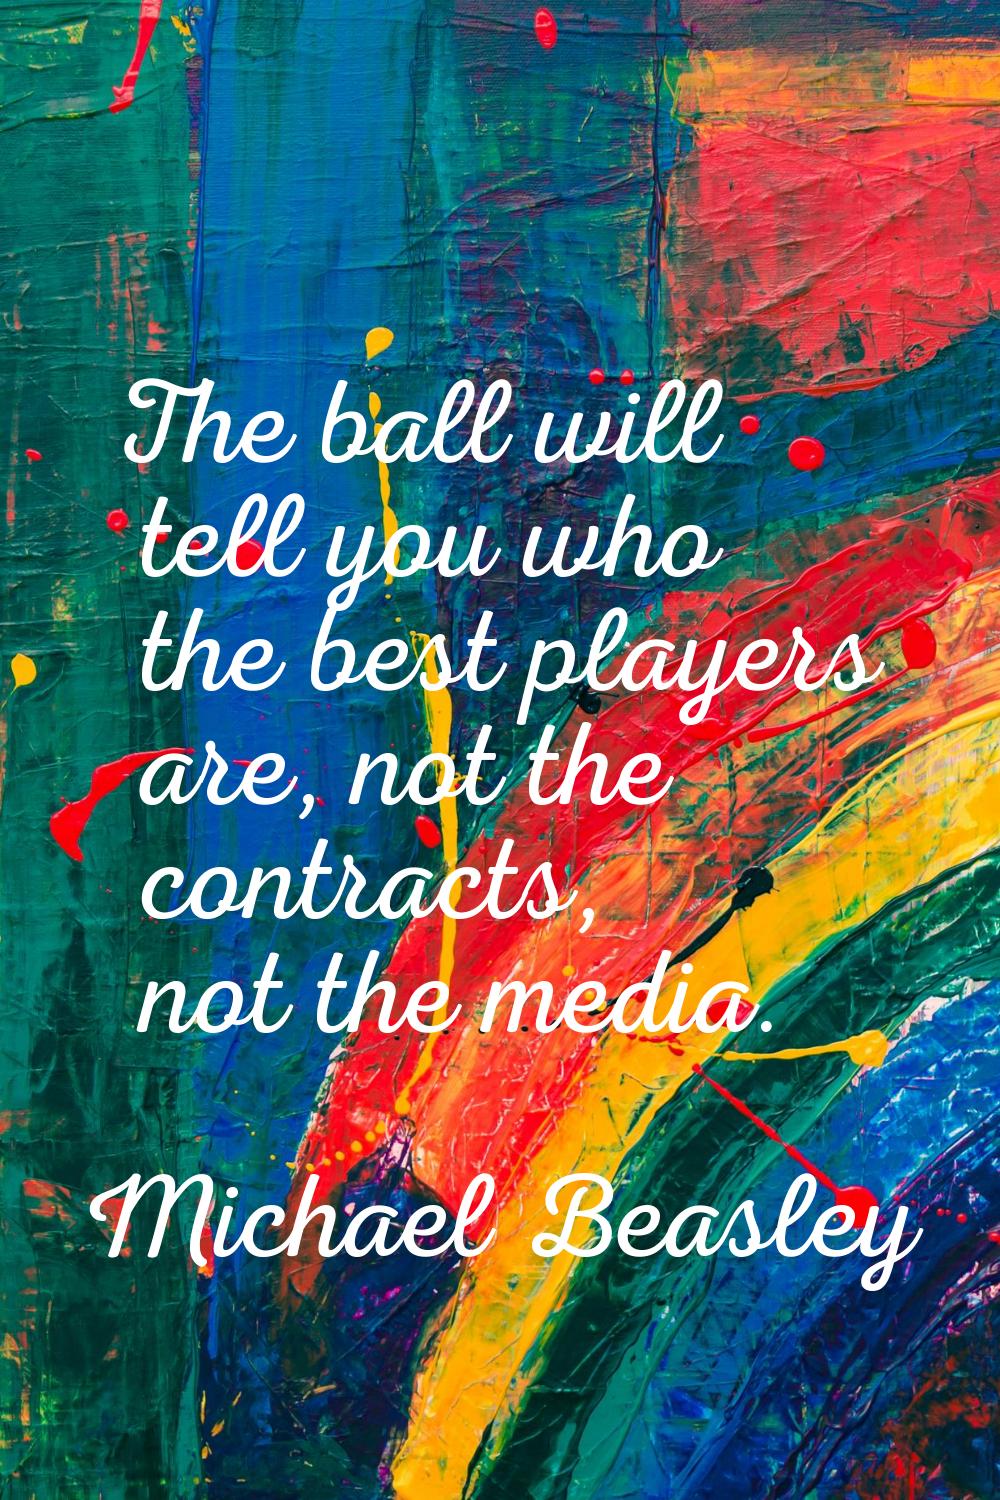 The ball will tell you who the best players are, not the contracts, not the media.